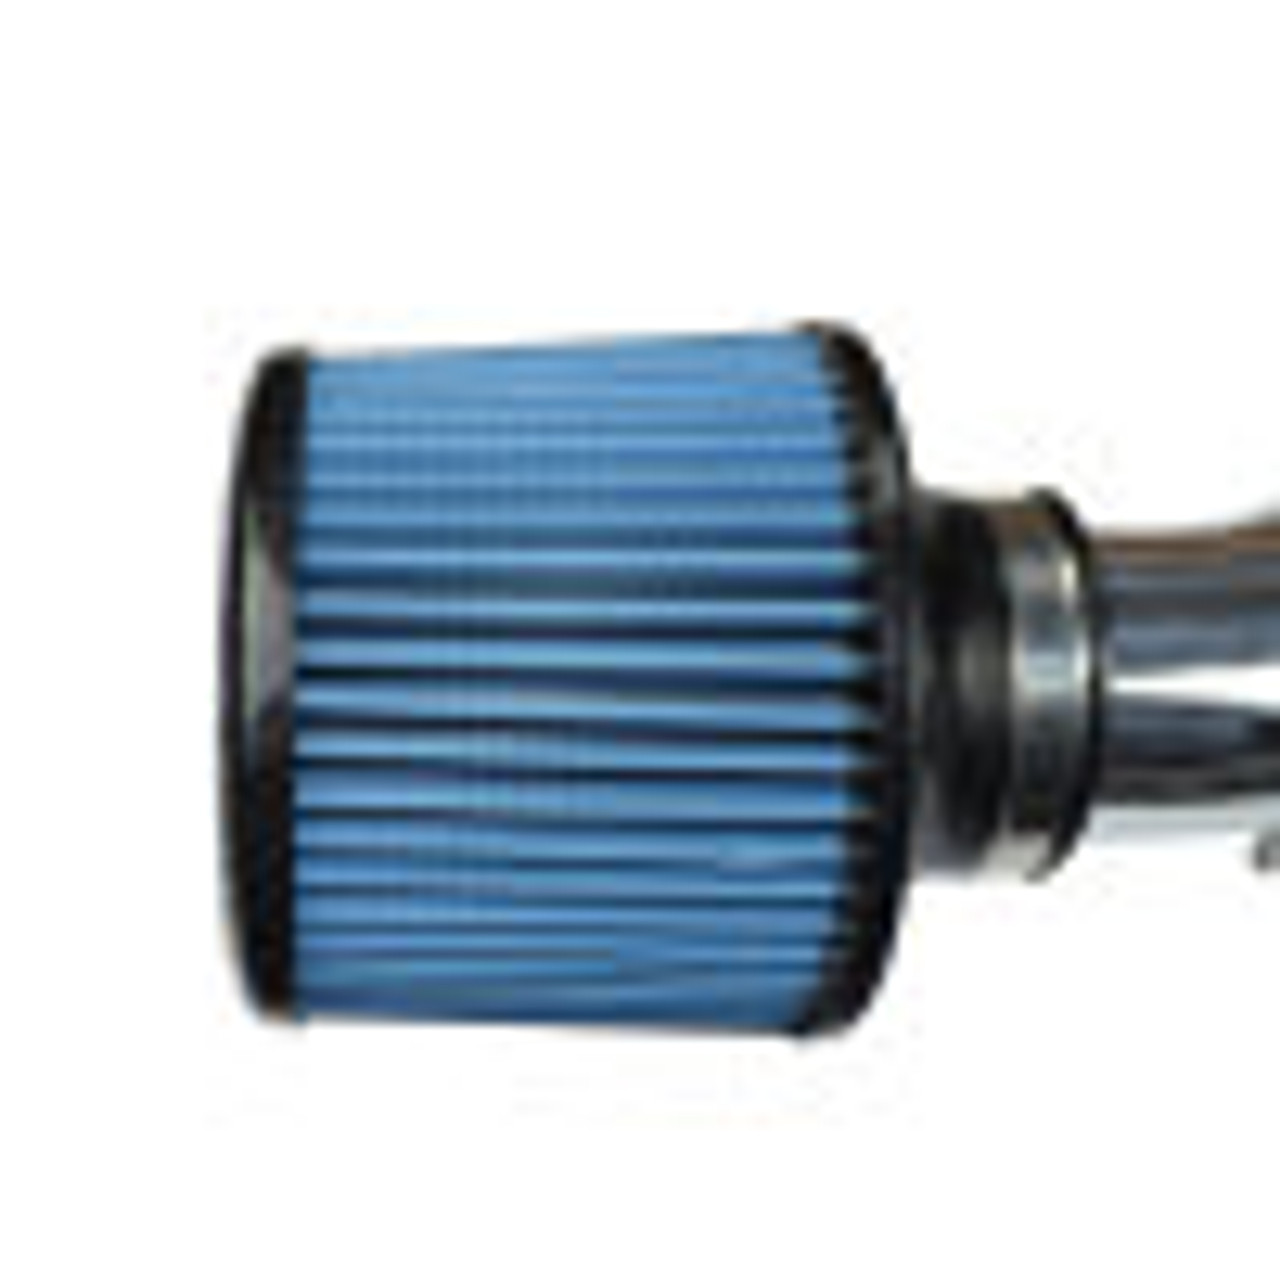 MAZDA COLD AIR INTAKE SYSTEM.  
Color: Polished.  Intake Color: Polished.  Filter Color: Blue